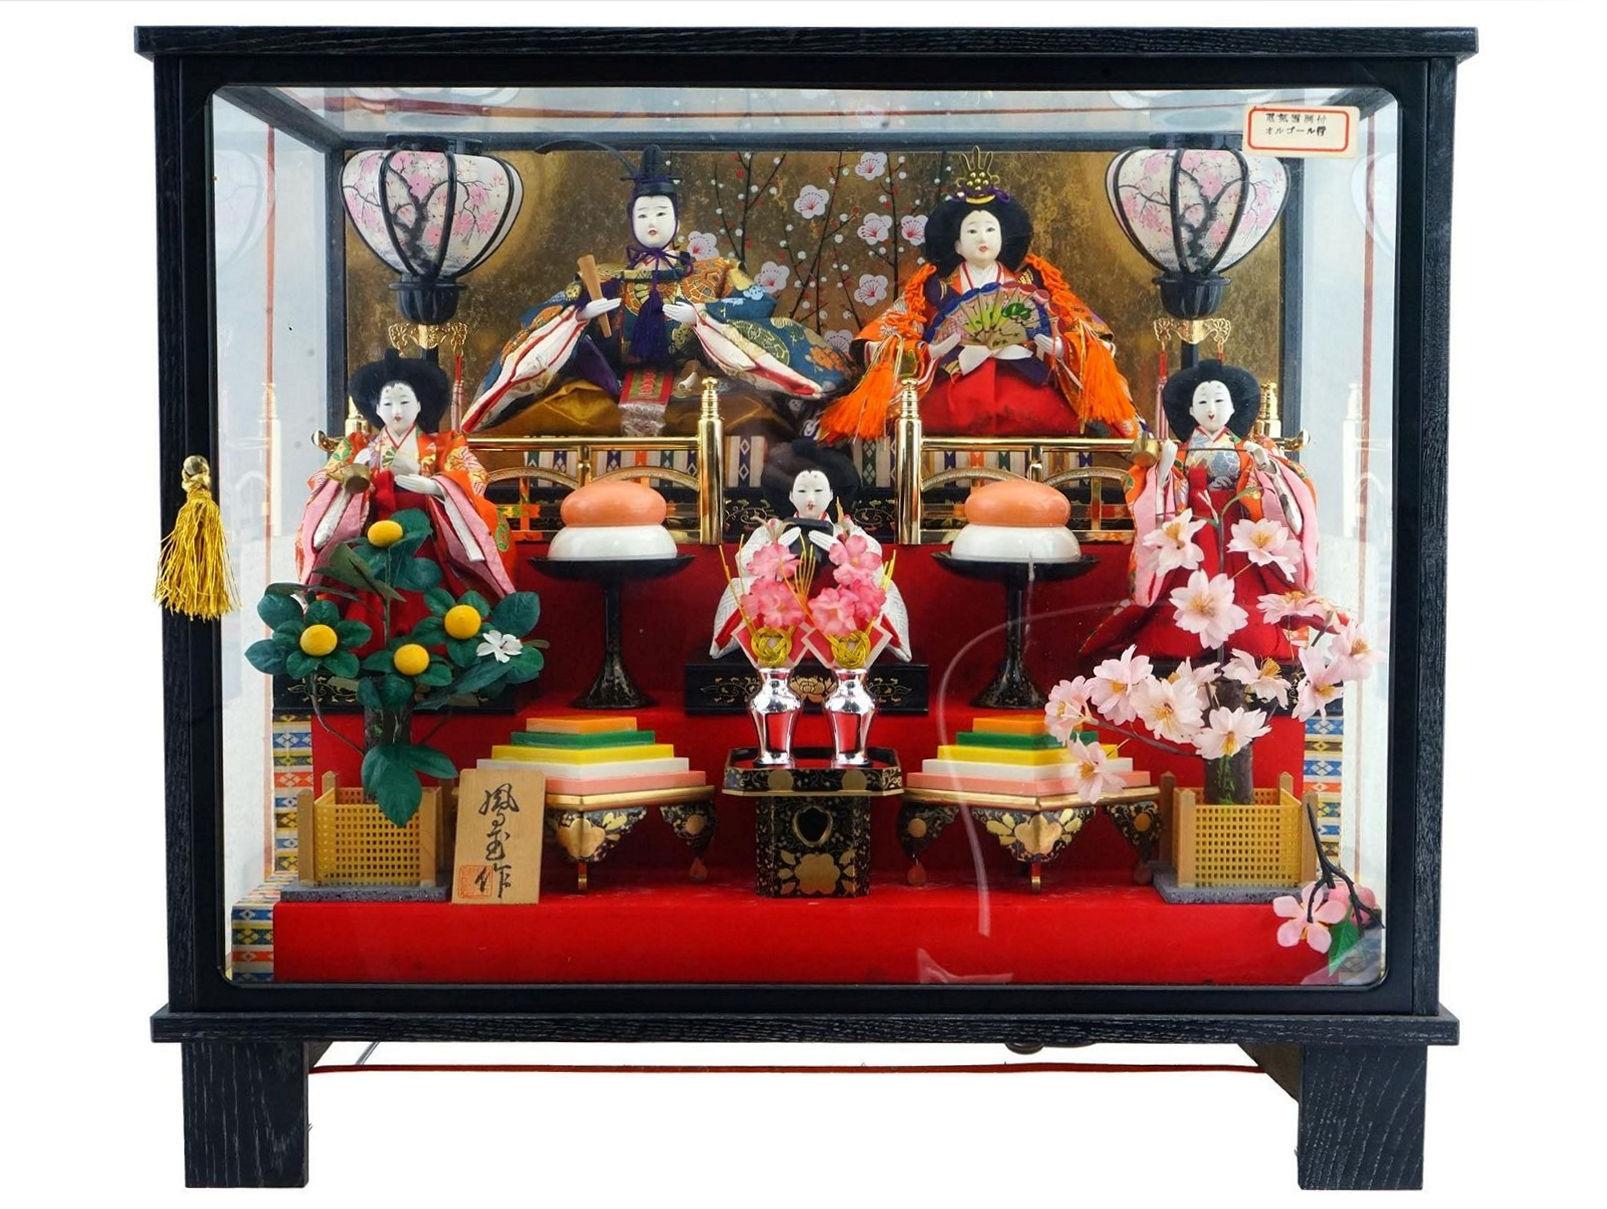 Charming diorama, circa 1990s, representing the coronation of Emperor Akihito, born 1933, the 125th Emperor of Japan who ruled from 1989 until his abdication in 2019.  With hand-painted ceramic bodies dressed in traditional jacquard fabric clothing